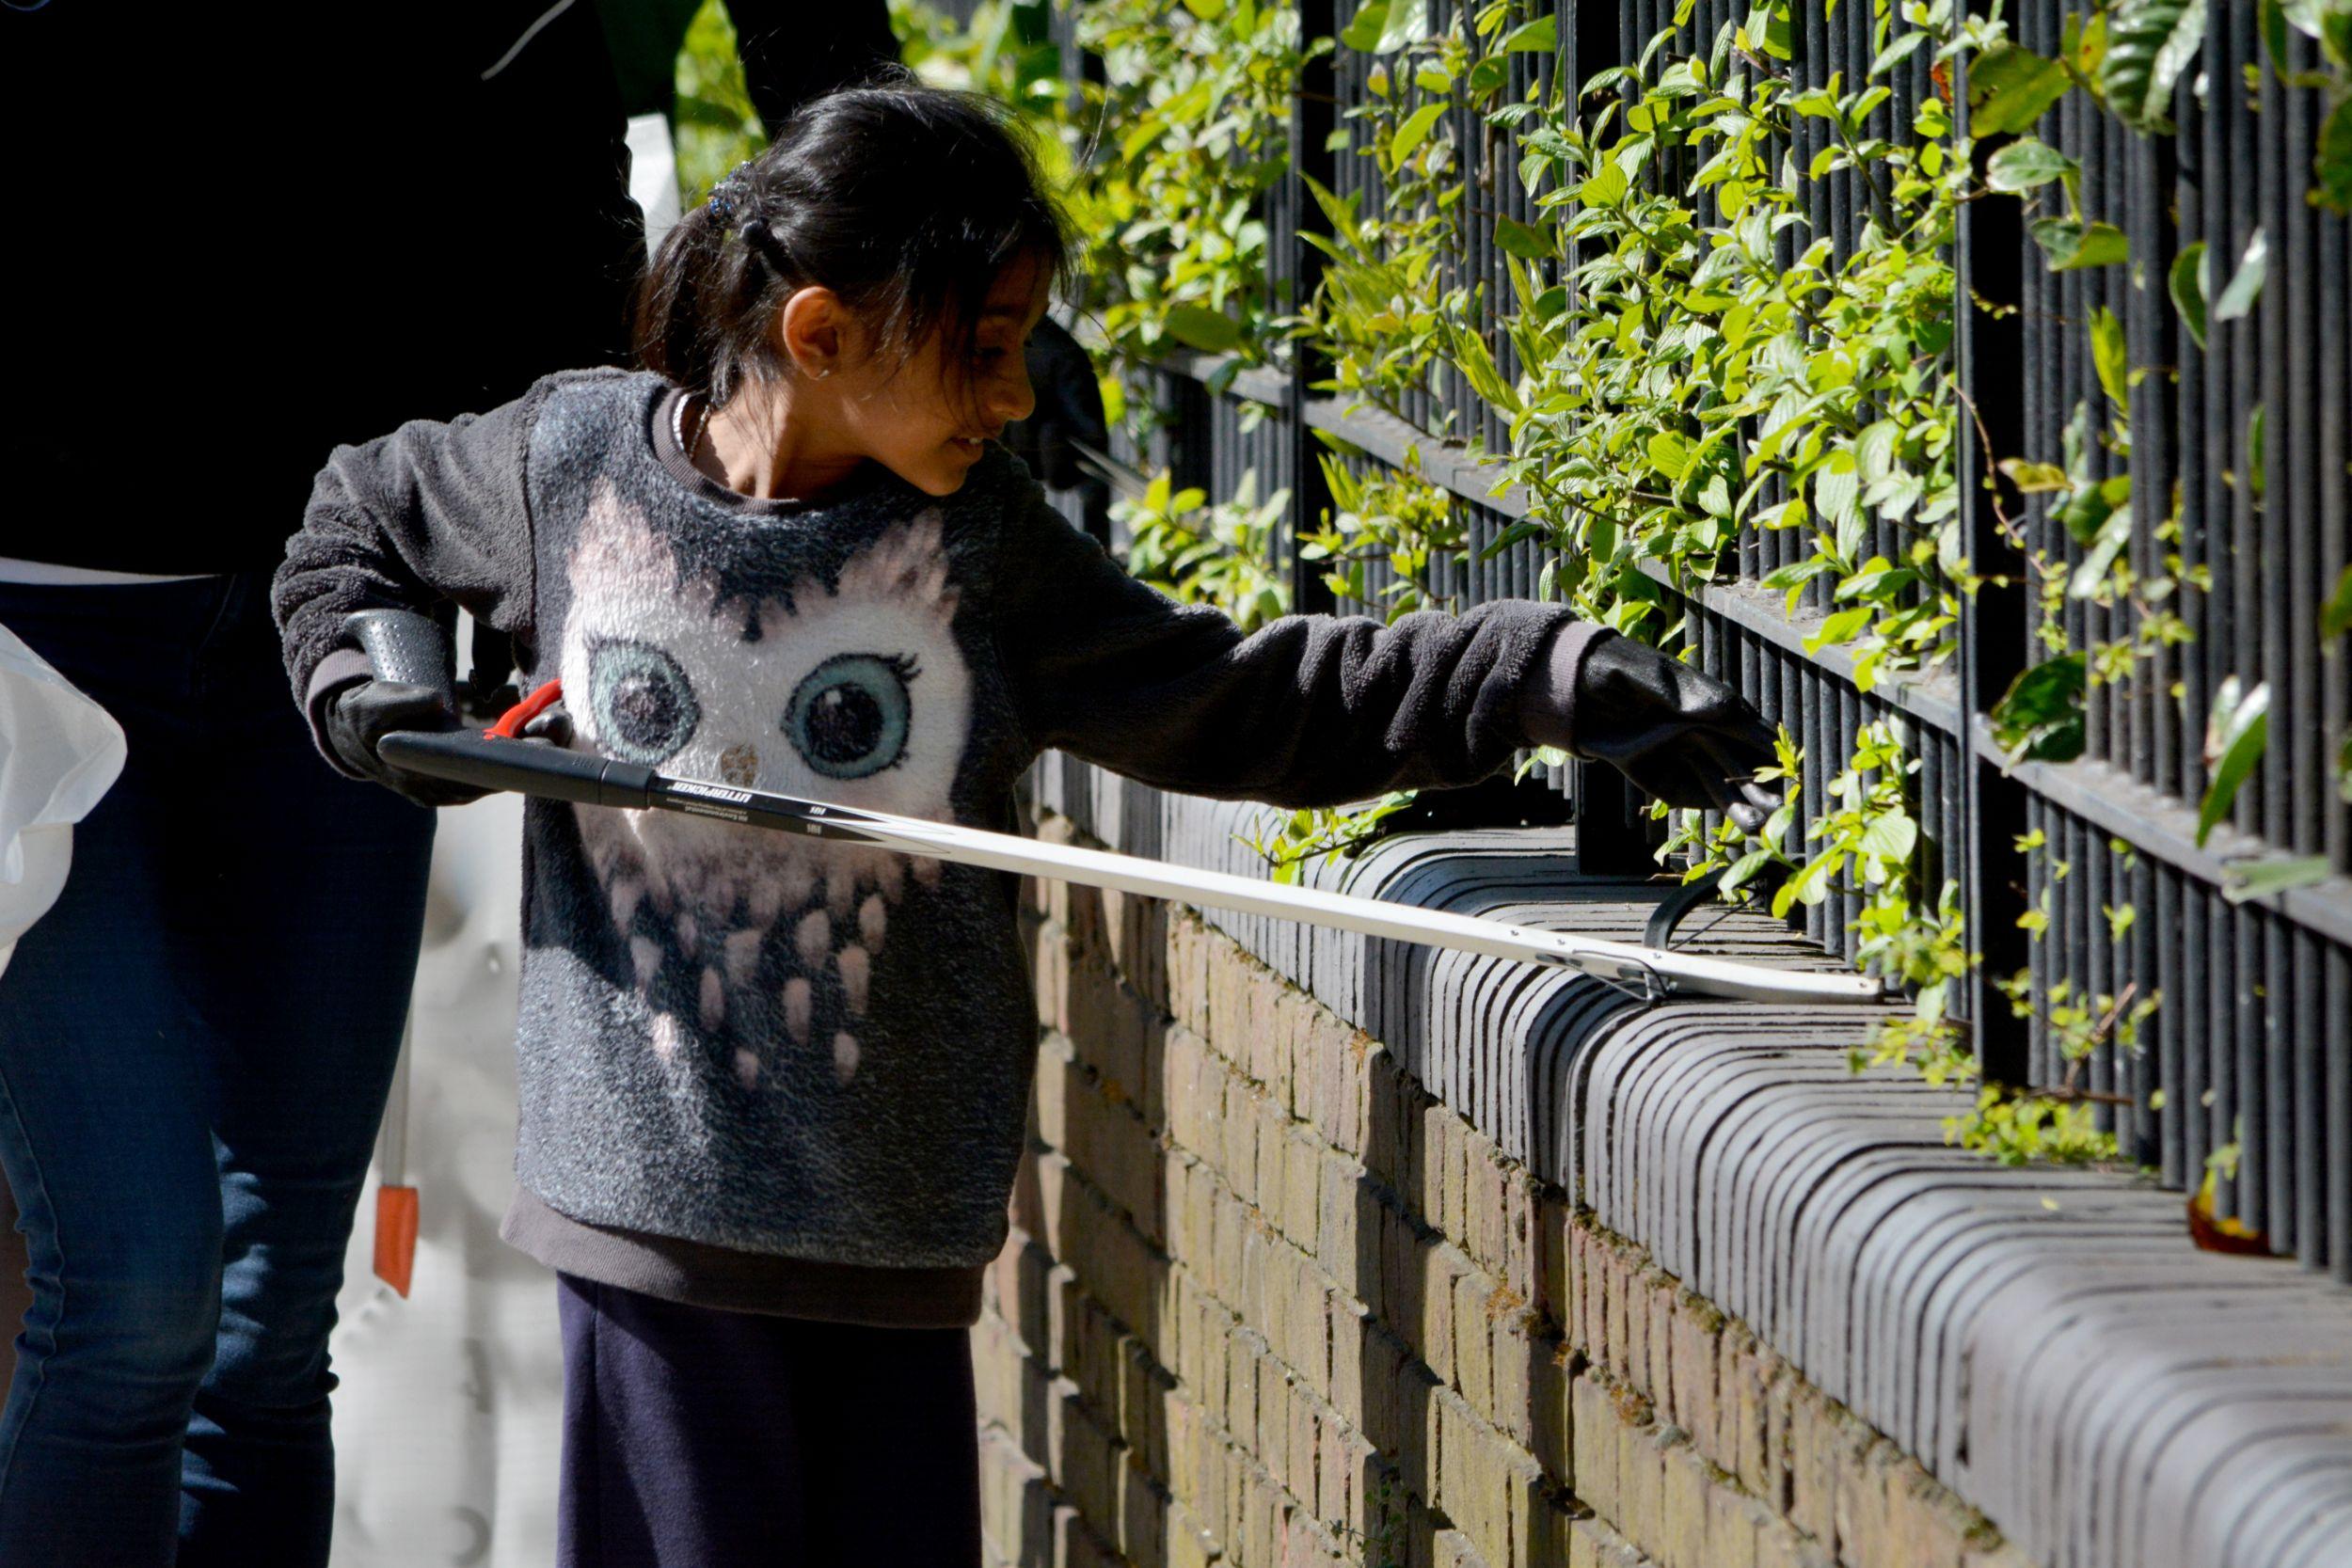 A girl searching for litter between railings